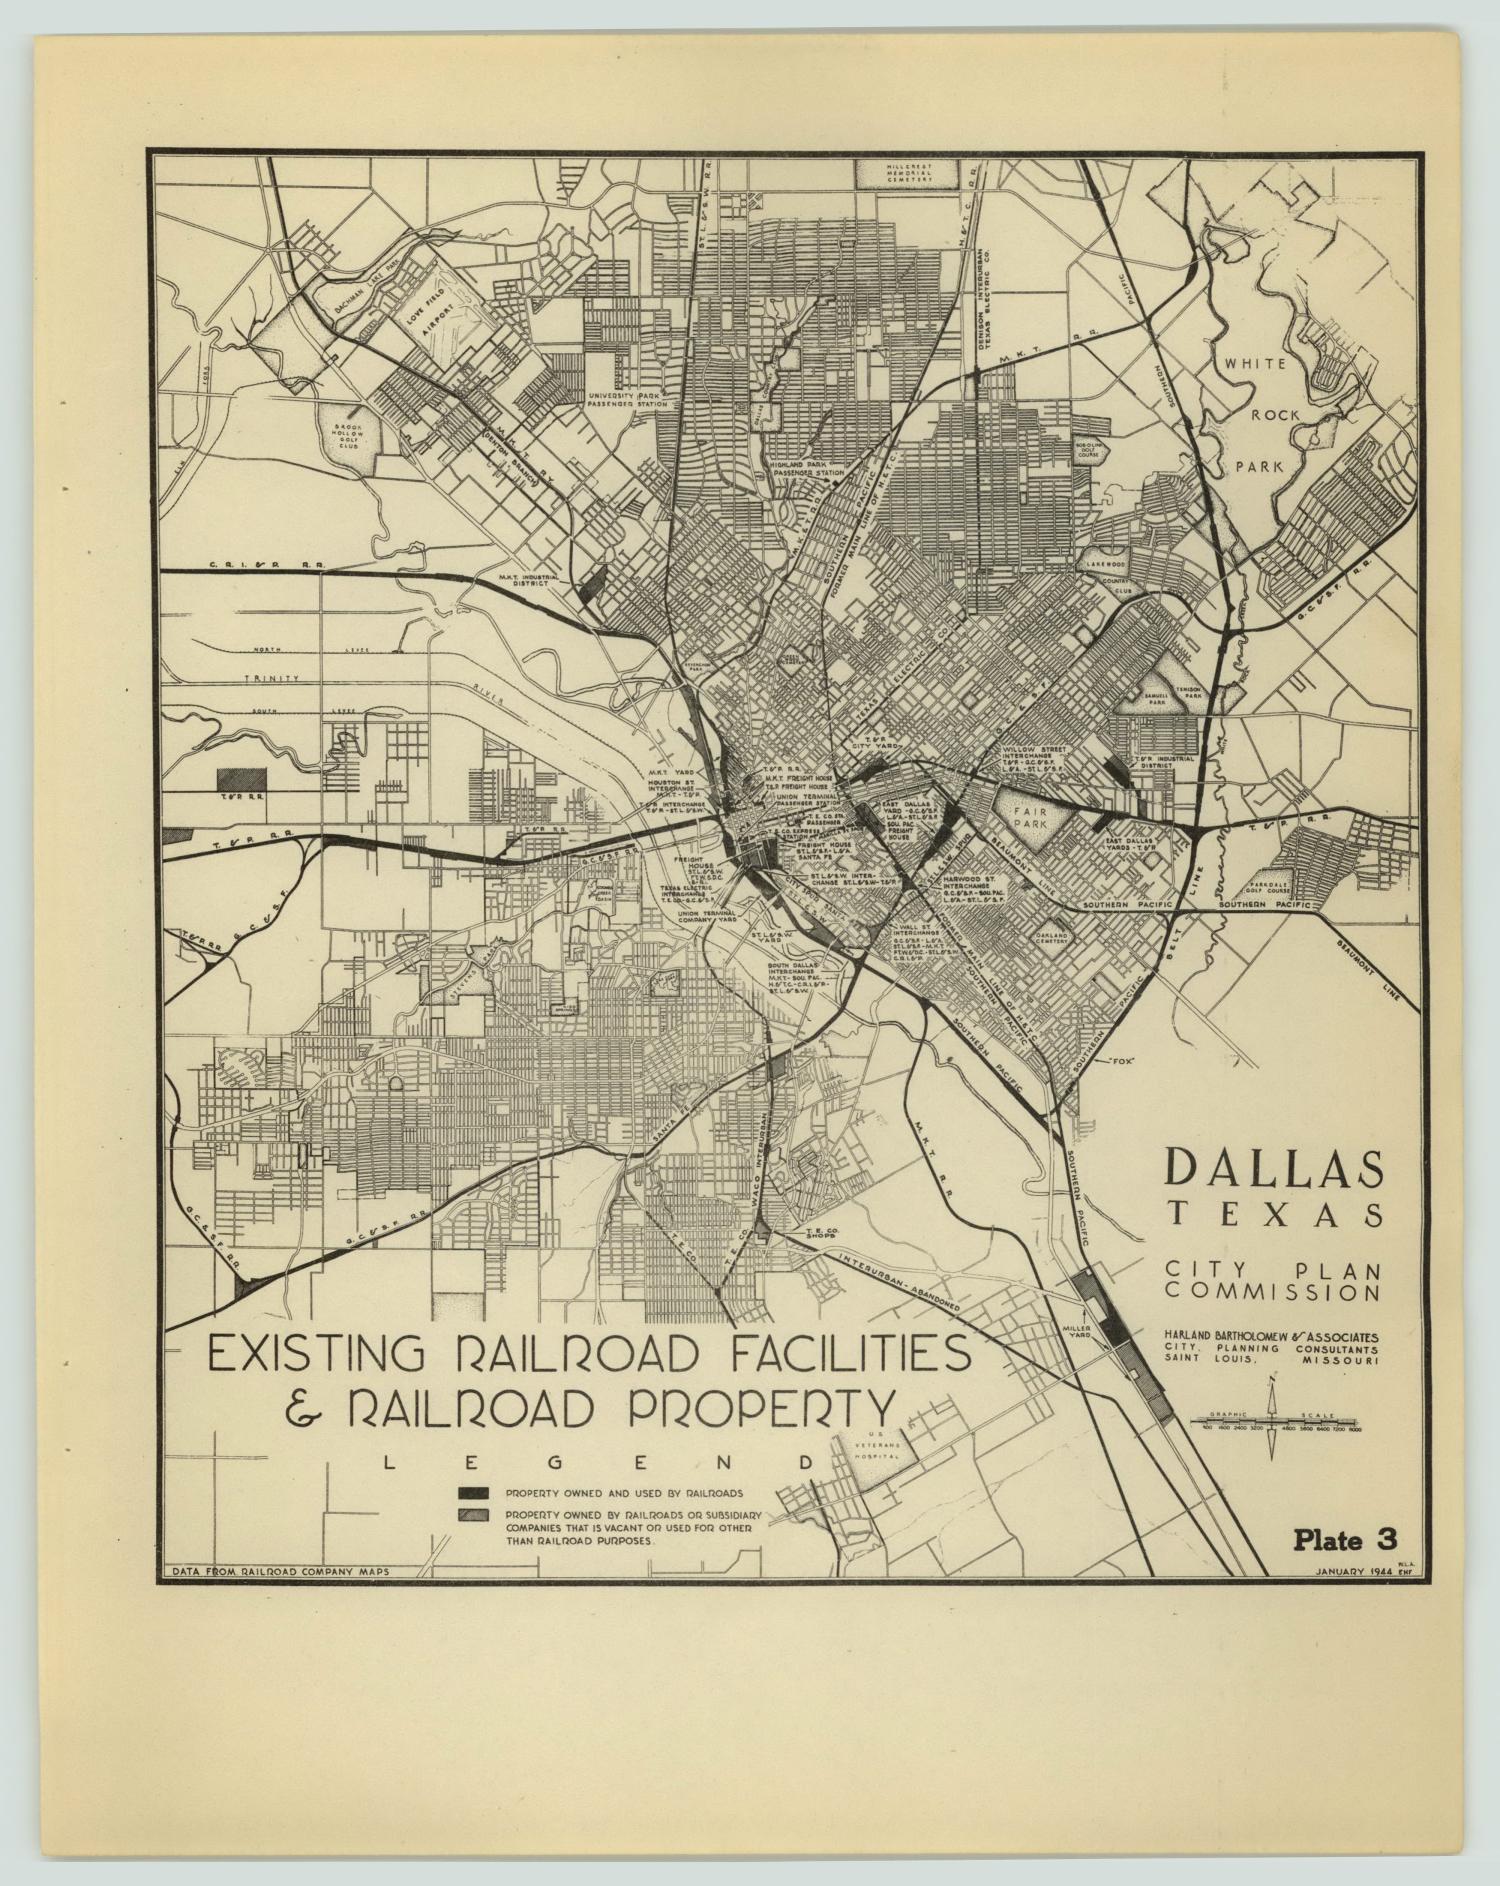 A Master Plan for Dallas, Texas, Report 6: Transportation Facilities, Rail-Air-Highways-Water
                                                
                                                    Plate 03
                                                